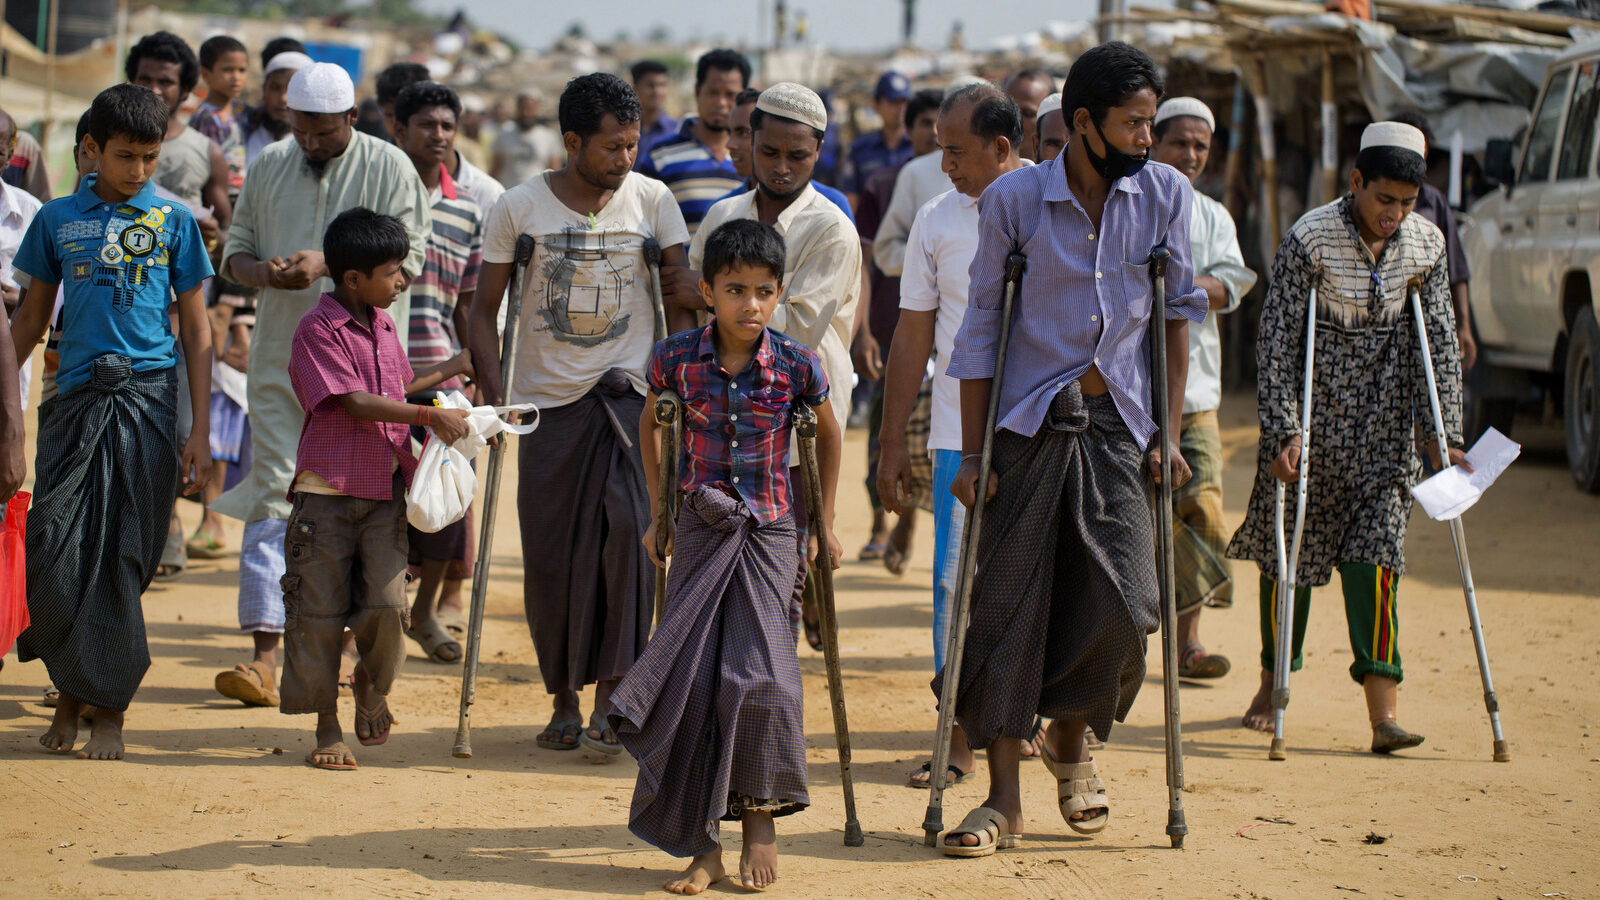 Wounded Rohingya refugees walk with the help of crutches as they await the arrival of a U.N. Security Council team at the Kutupalong Rohingya refugee camp in Kutupalong, Bangladesh, Sunday, April 29, 2018. A U.N. Security Council team visiting Bangladesh promised Sunday to work hard to resolve a crisis involving hundreds of thousands of Rohingya Muslims who have fled to the country to escape military-led violence in Myanmar. (AP/A.M. Ahad)